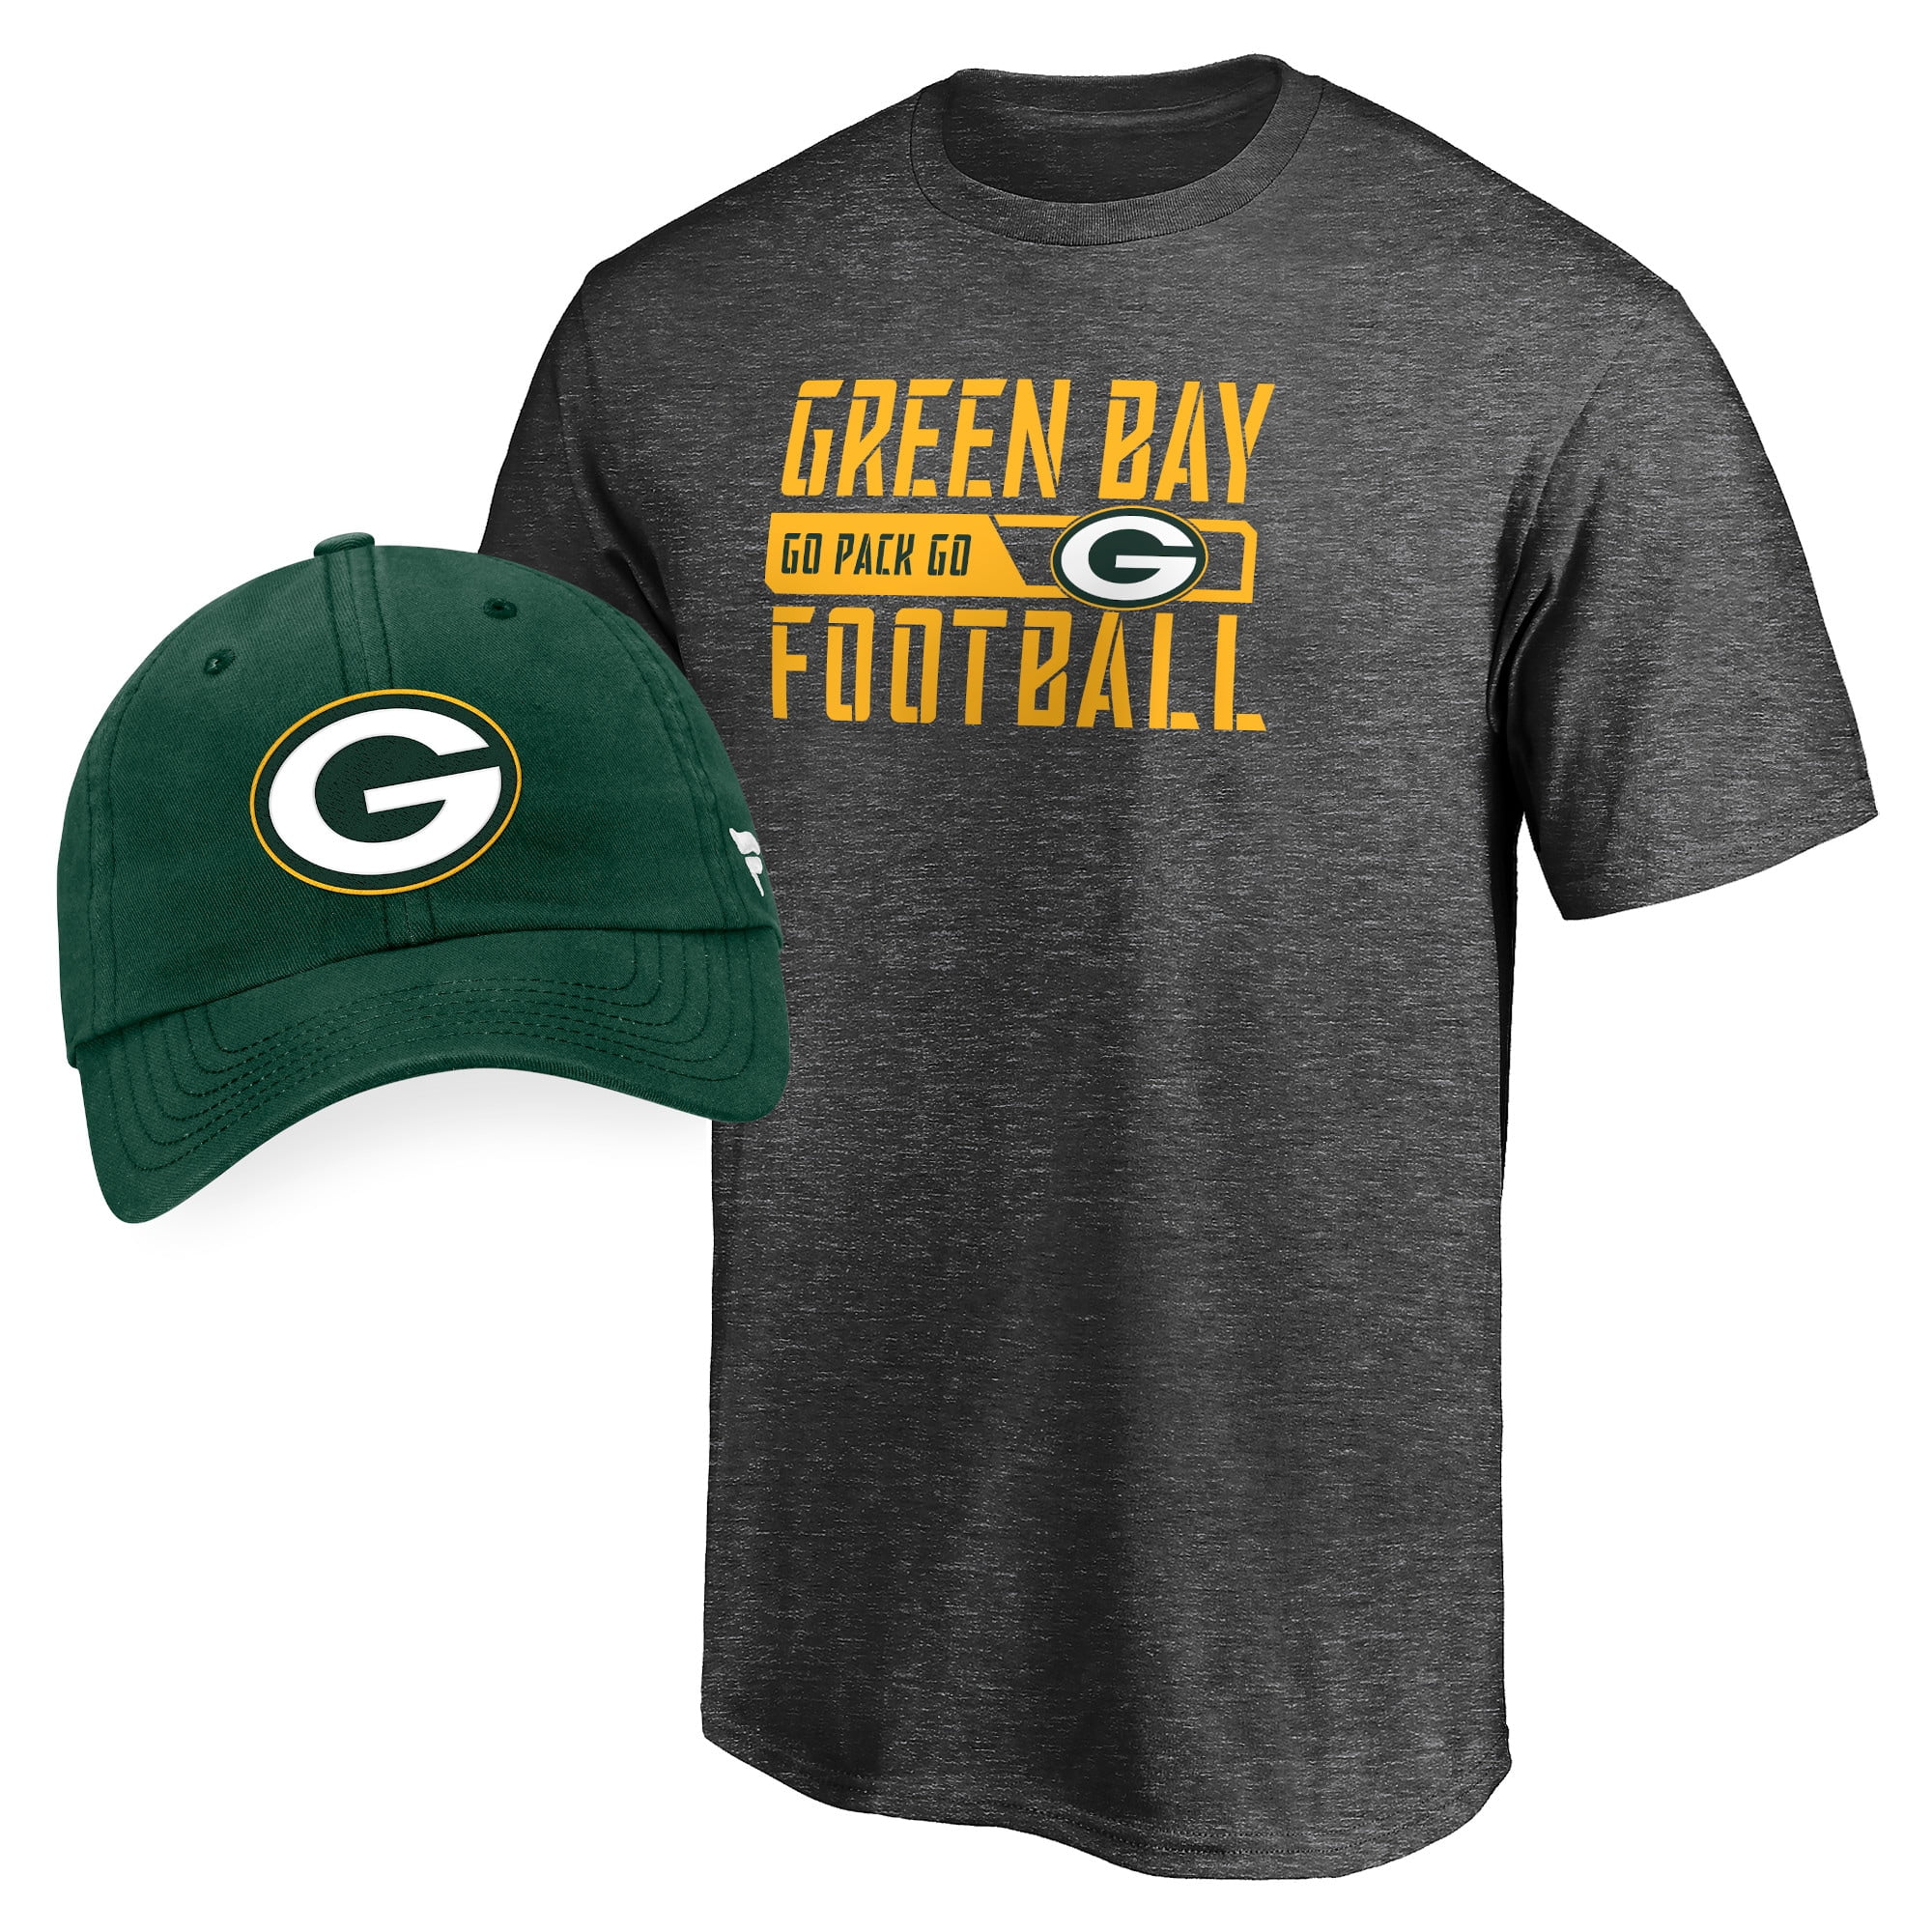 unique green bay packers t shirts